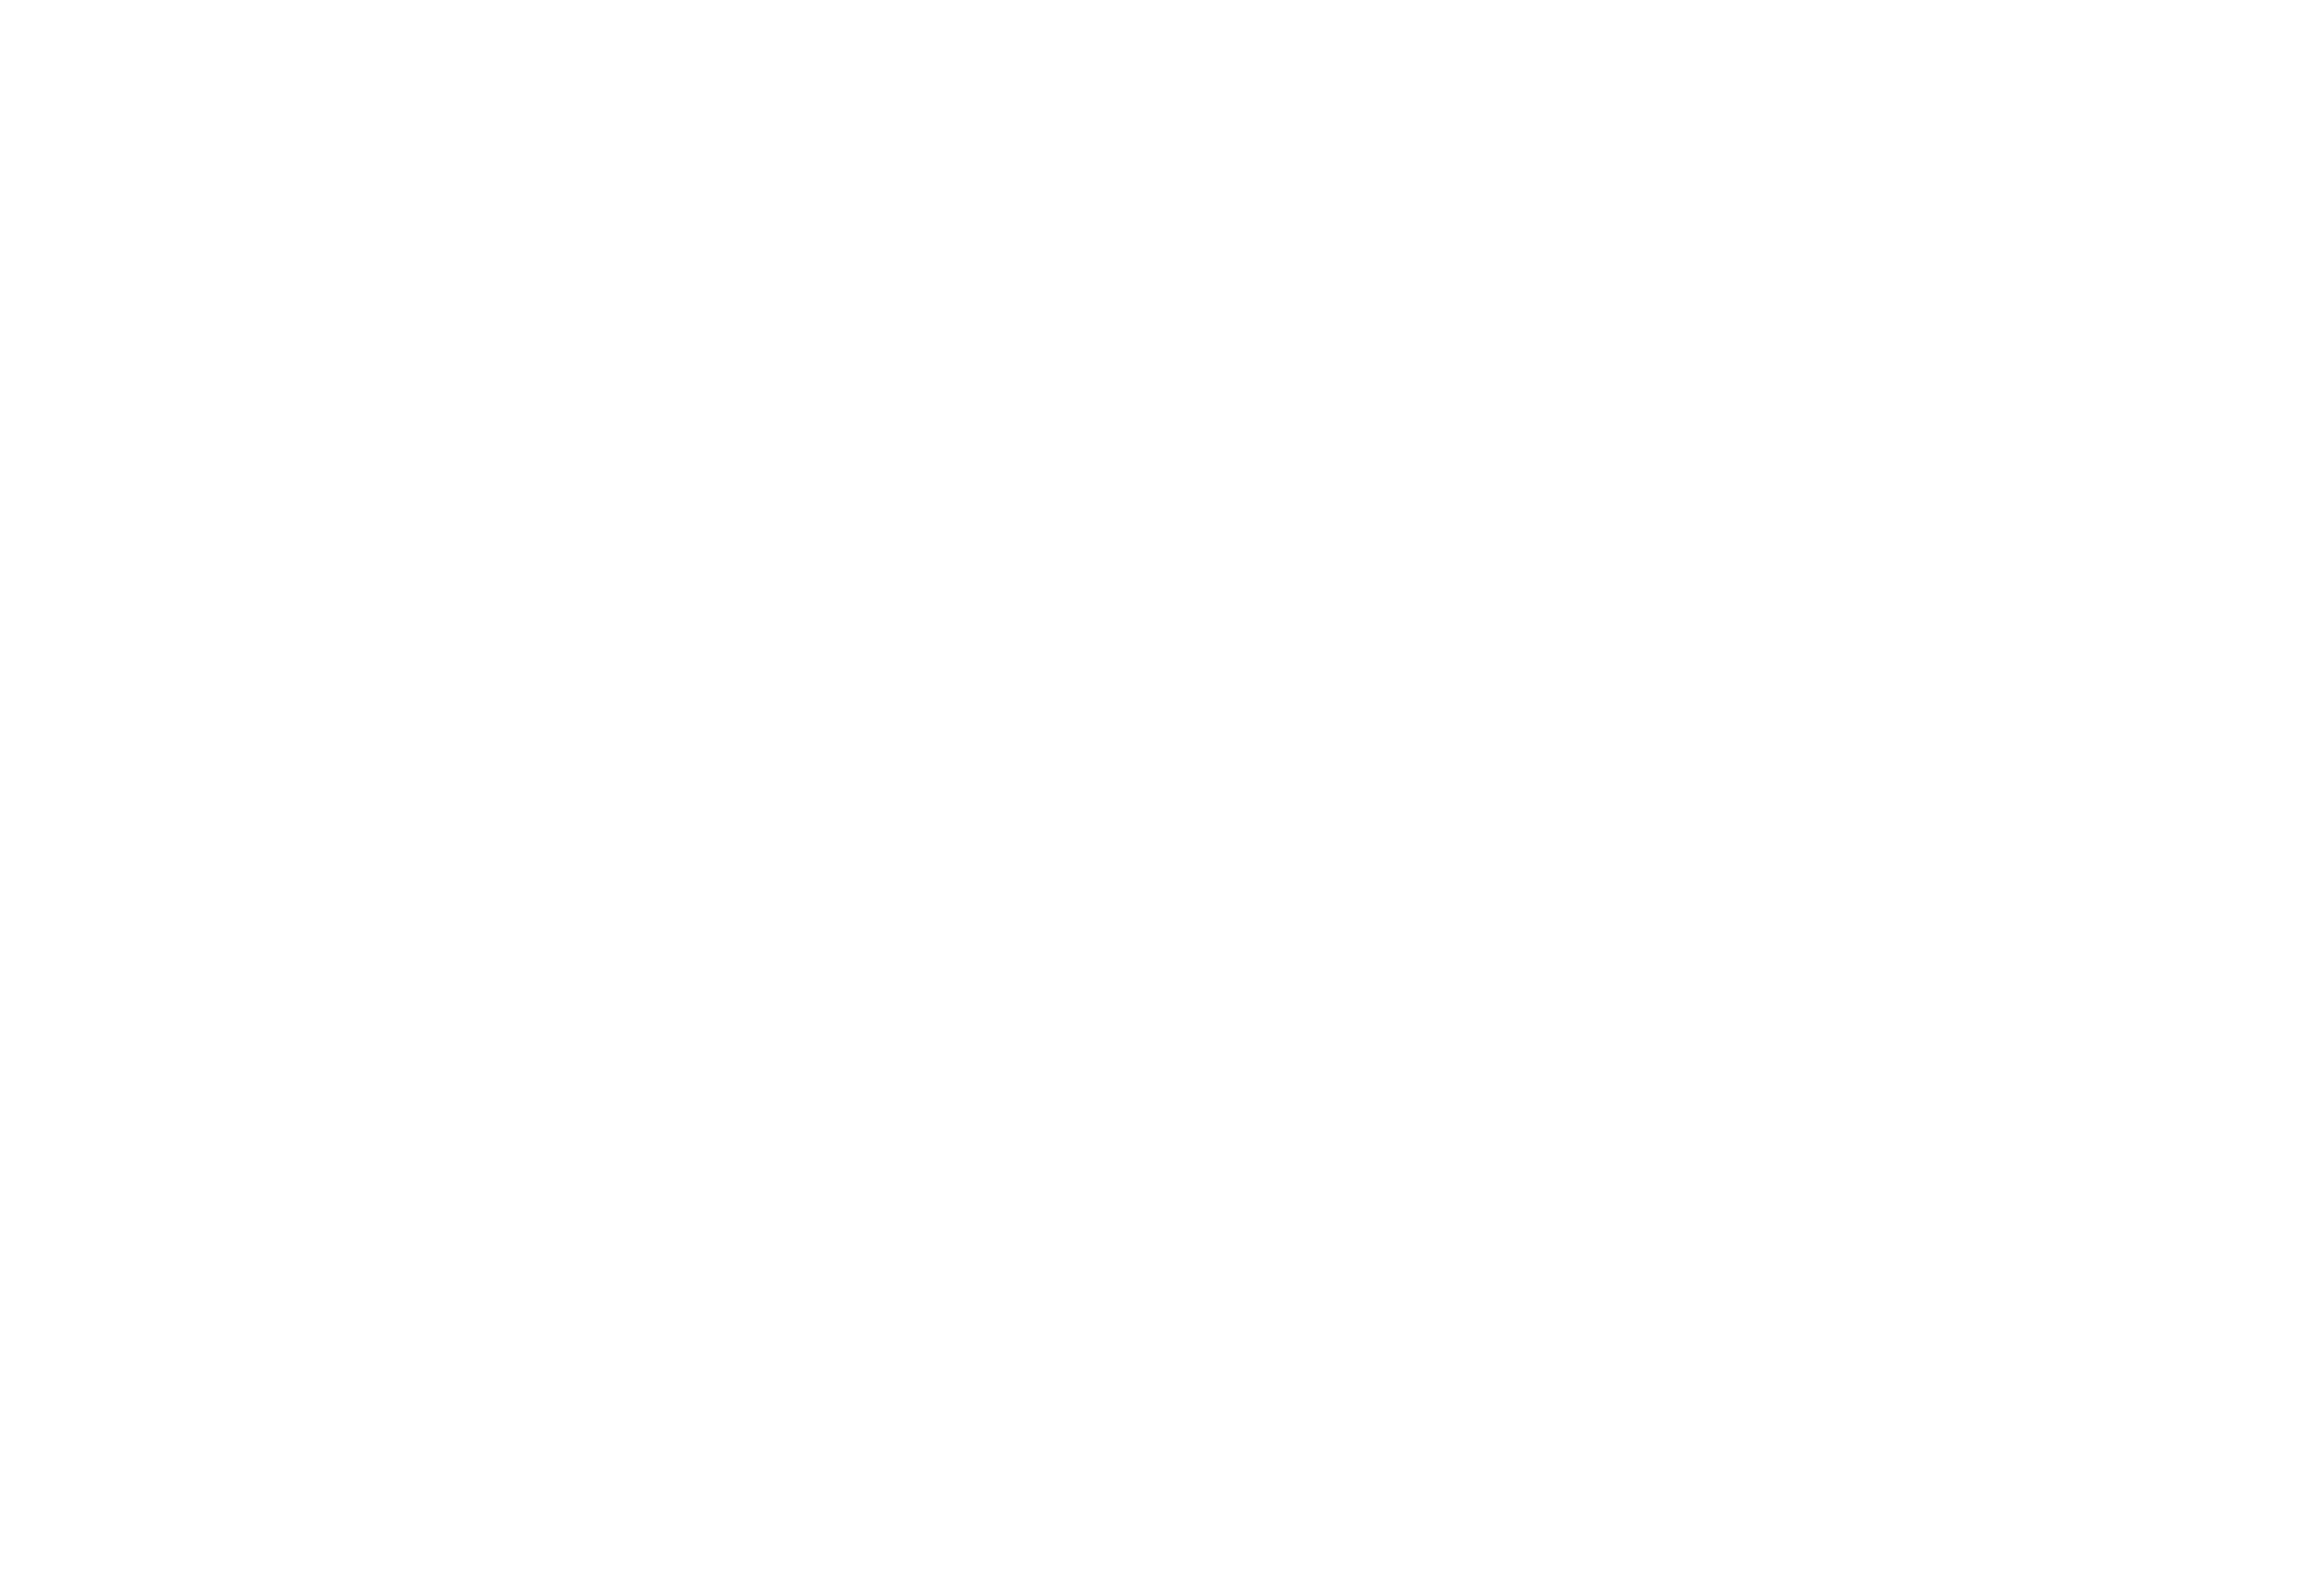 https://cdn.alleanza.it/-/media/alleanza/assets/iniziative/eventi/edufin-index-2023/banner-boxed-m_sito.png?rev=51ae9af515a94ad8aa321aa5414137ed